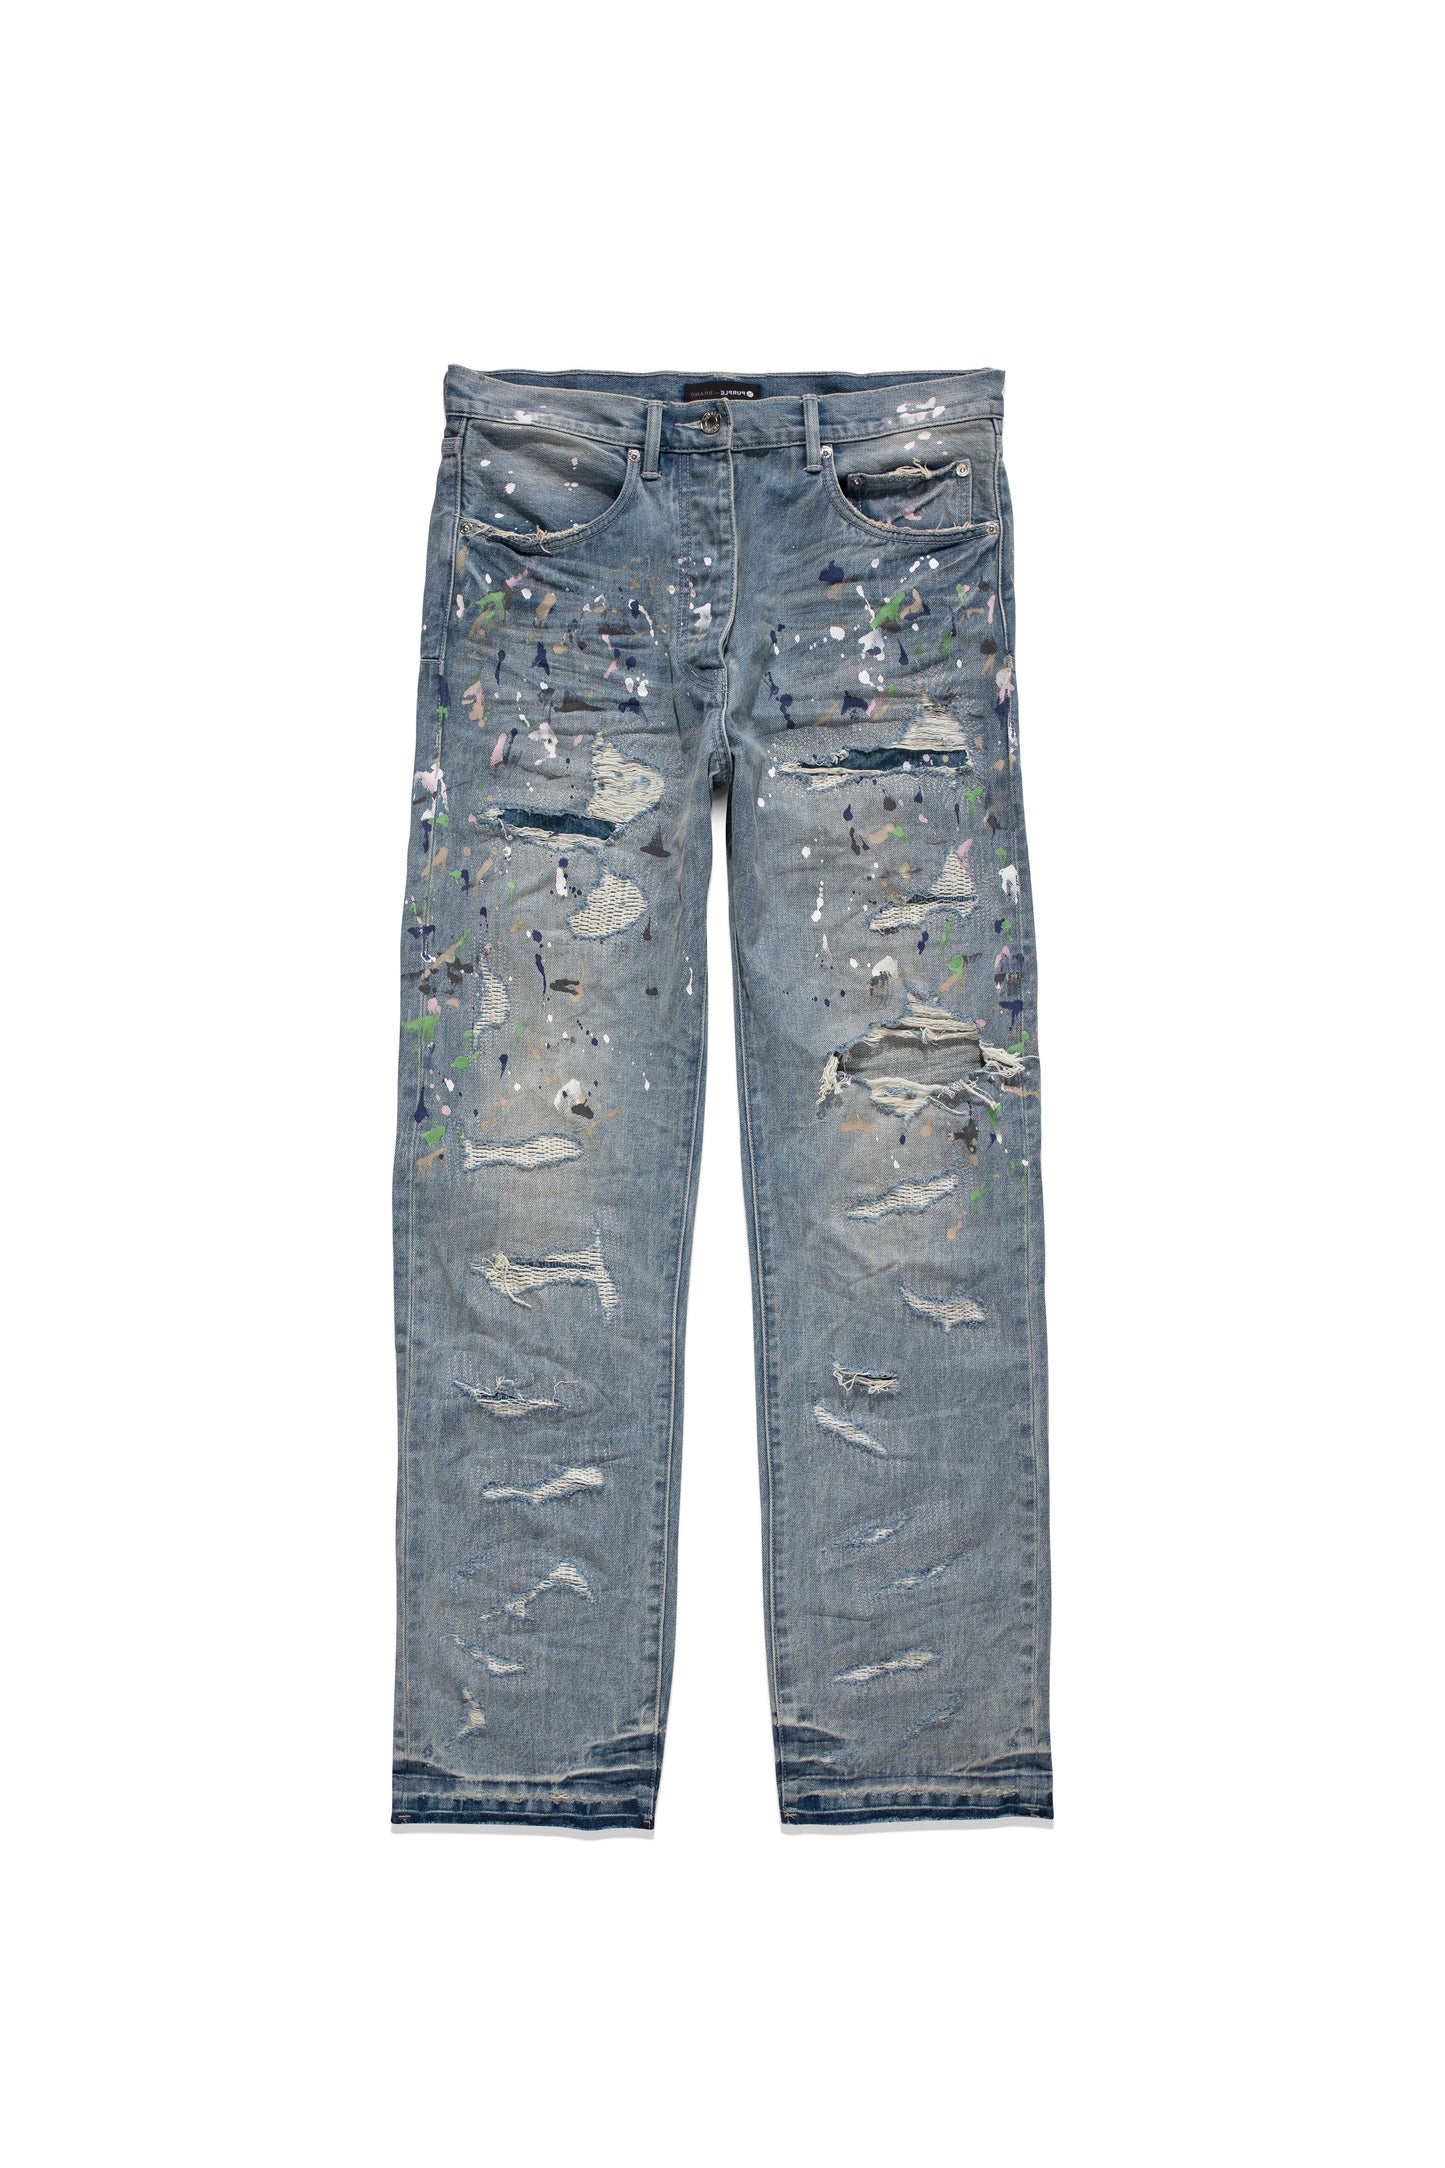 P011 MID RISE STRAIGHT LEG JEAN - Light Indigo With Heavy Repairs And Paint